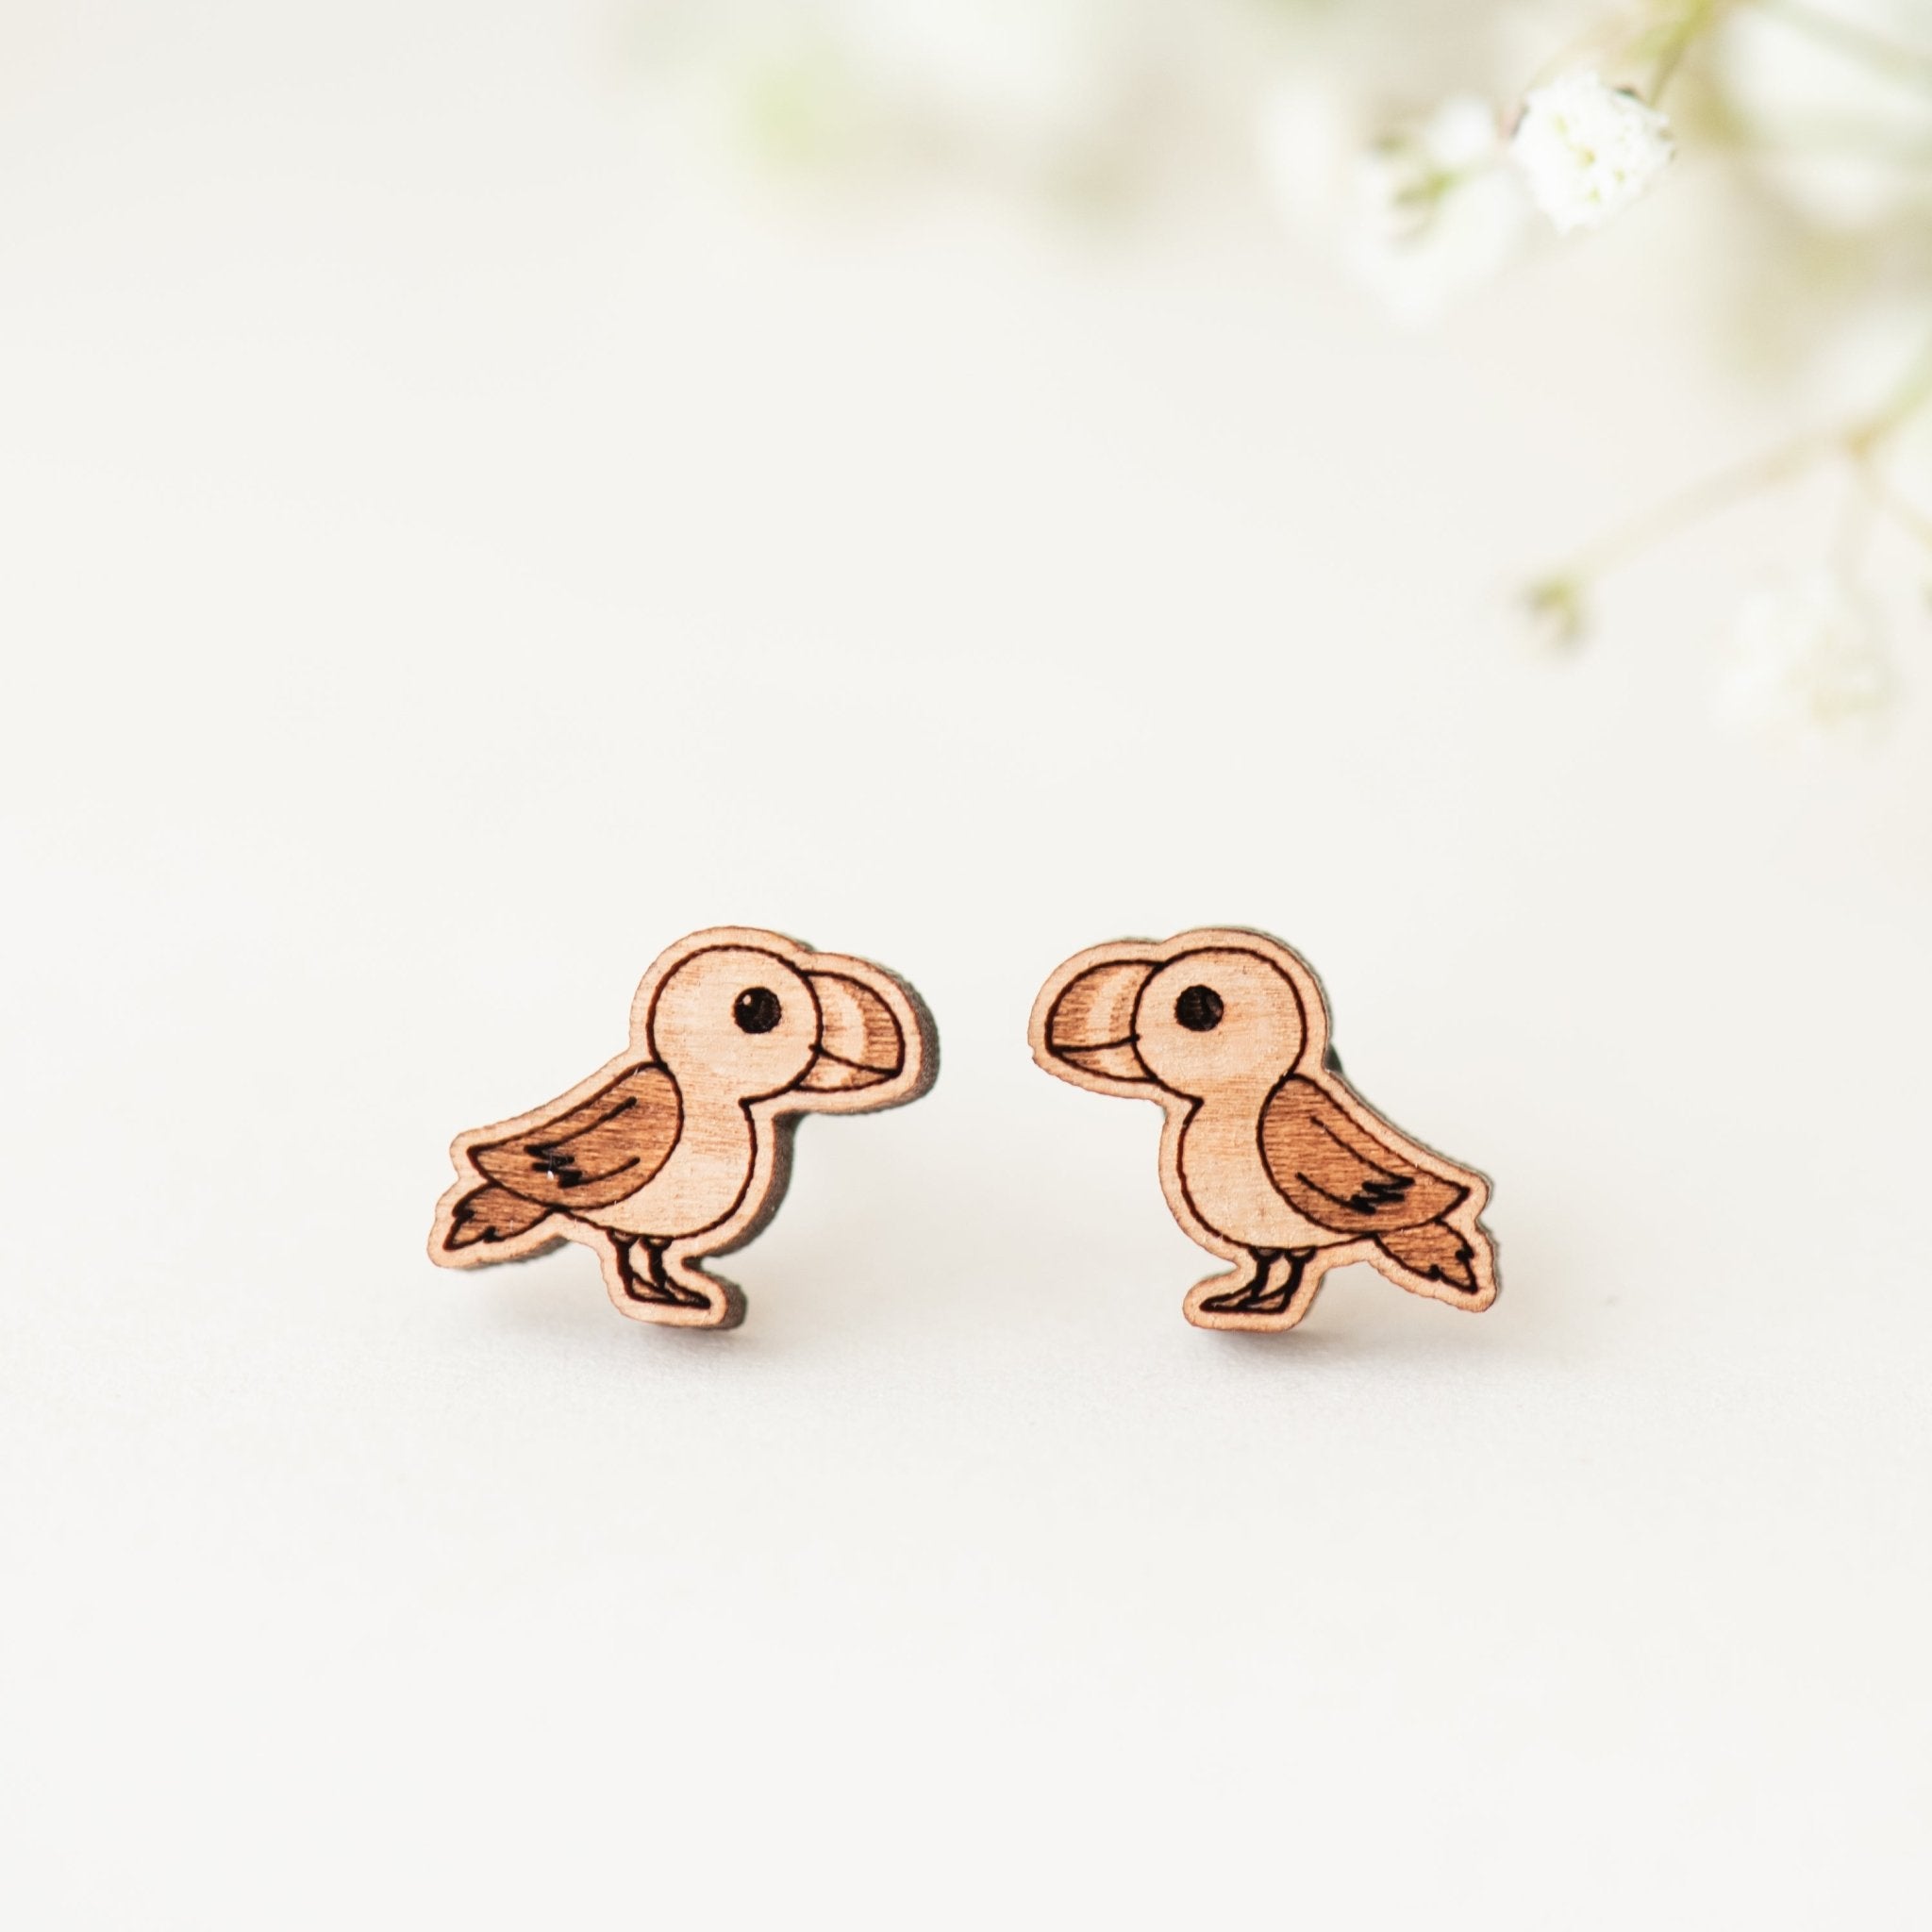 Puffin Bird Wooden Earrings - EB12006 - Robin Valley Official Store